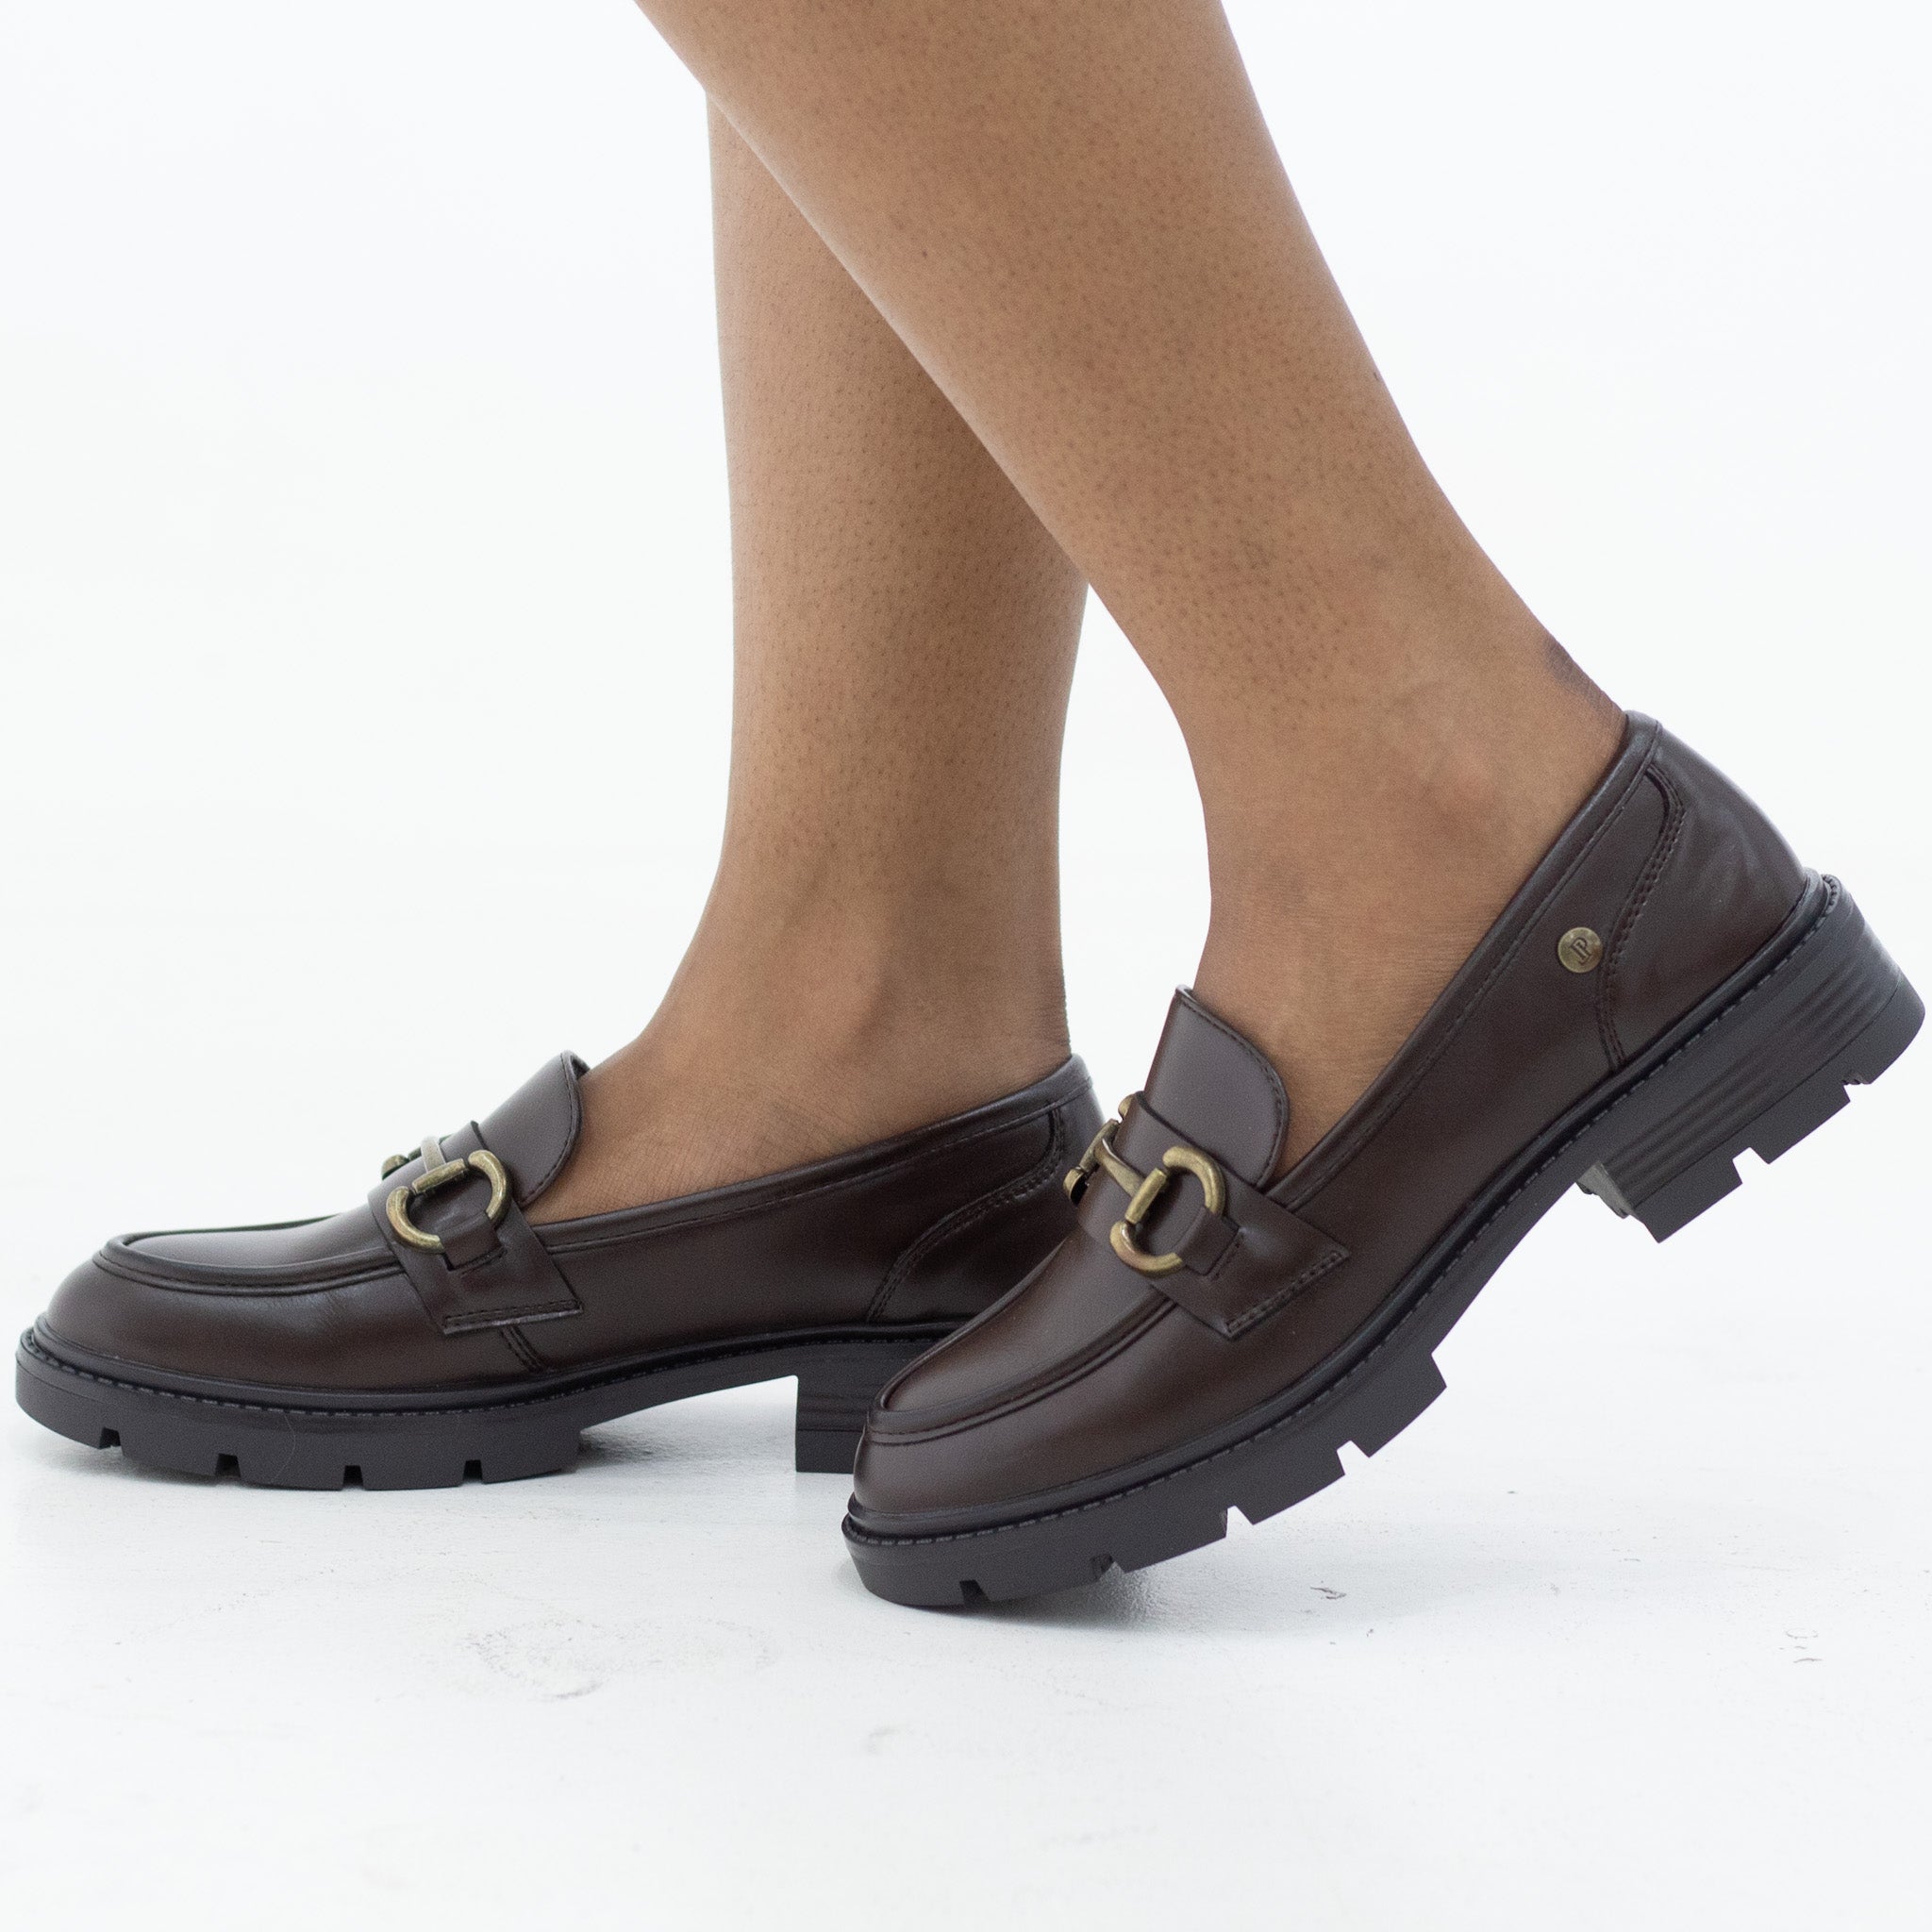 Franoli loafer chuncky with two circle